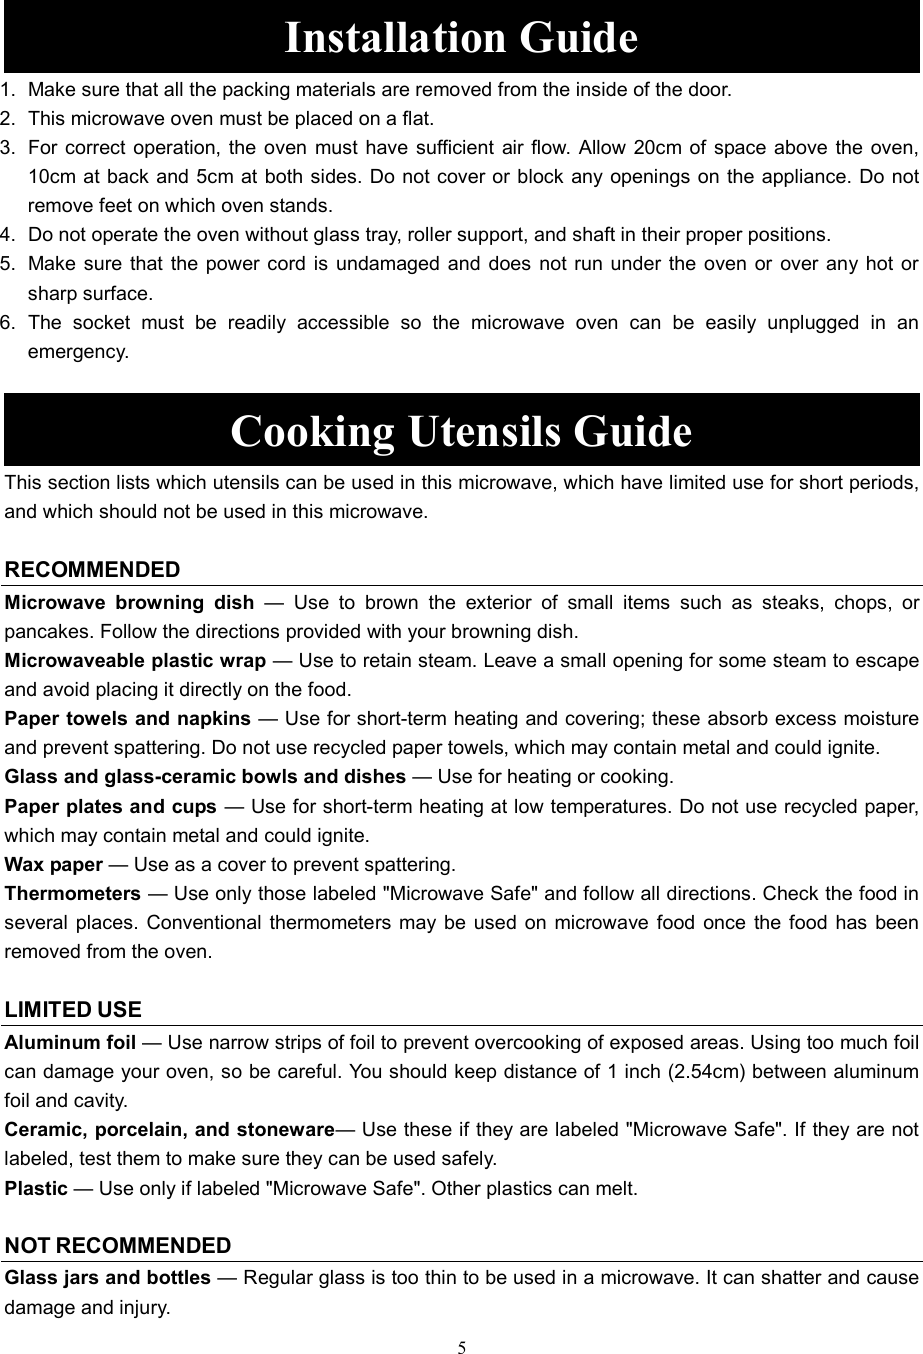 Page 5 of Galanz 7020007 Microwave Oven User Manual JS1M0609 23556 004